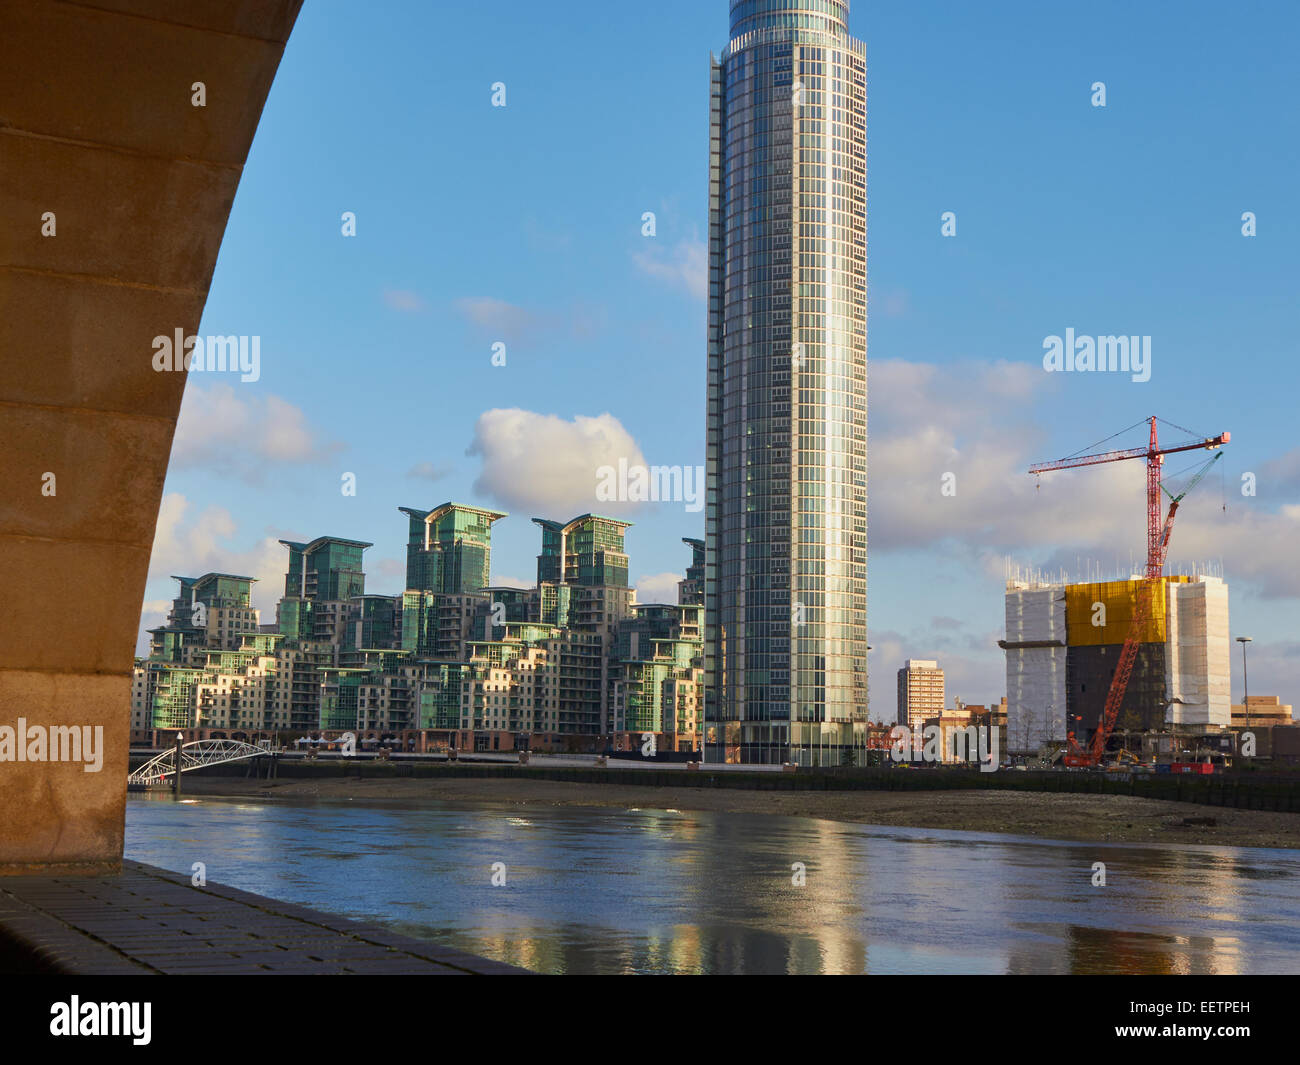 St George Wharf Tower luxury riverside apartments west London England Europe Stock Photo